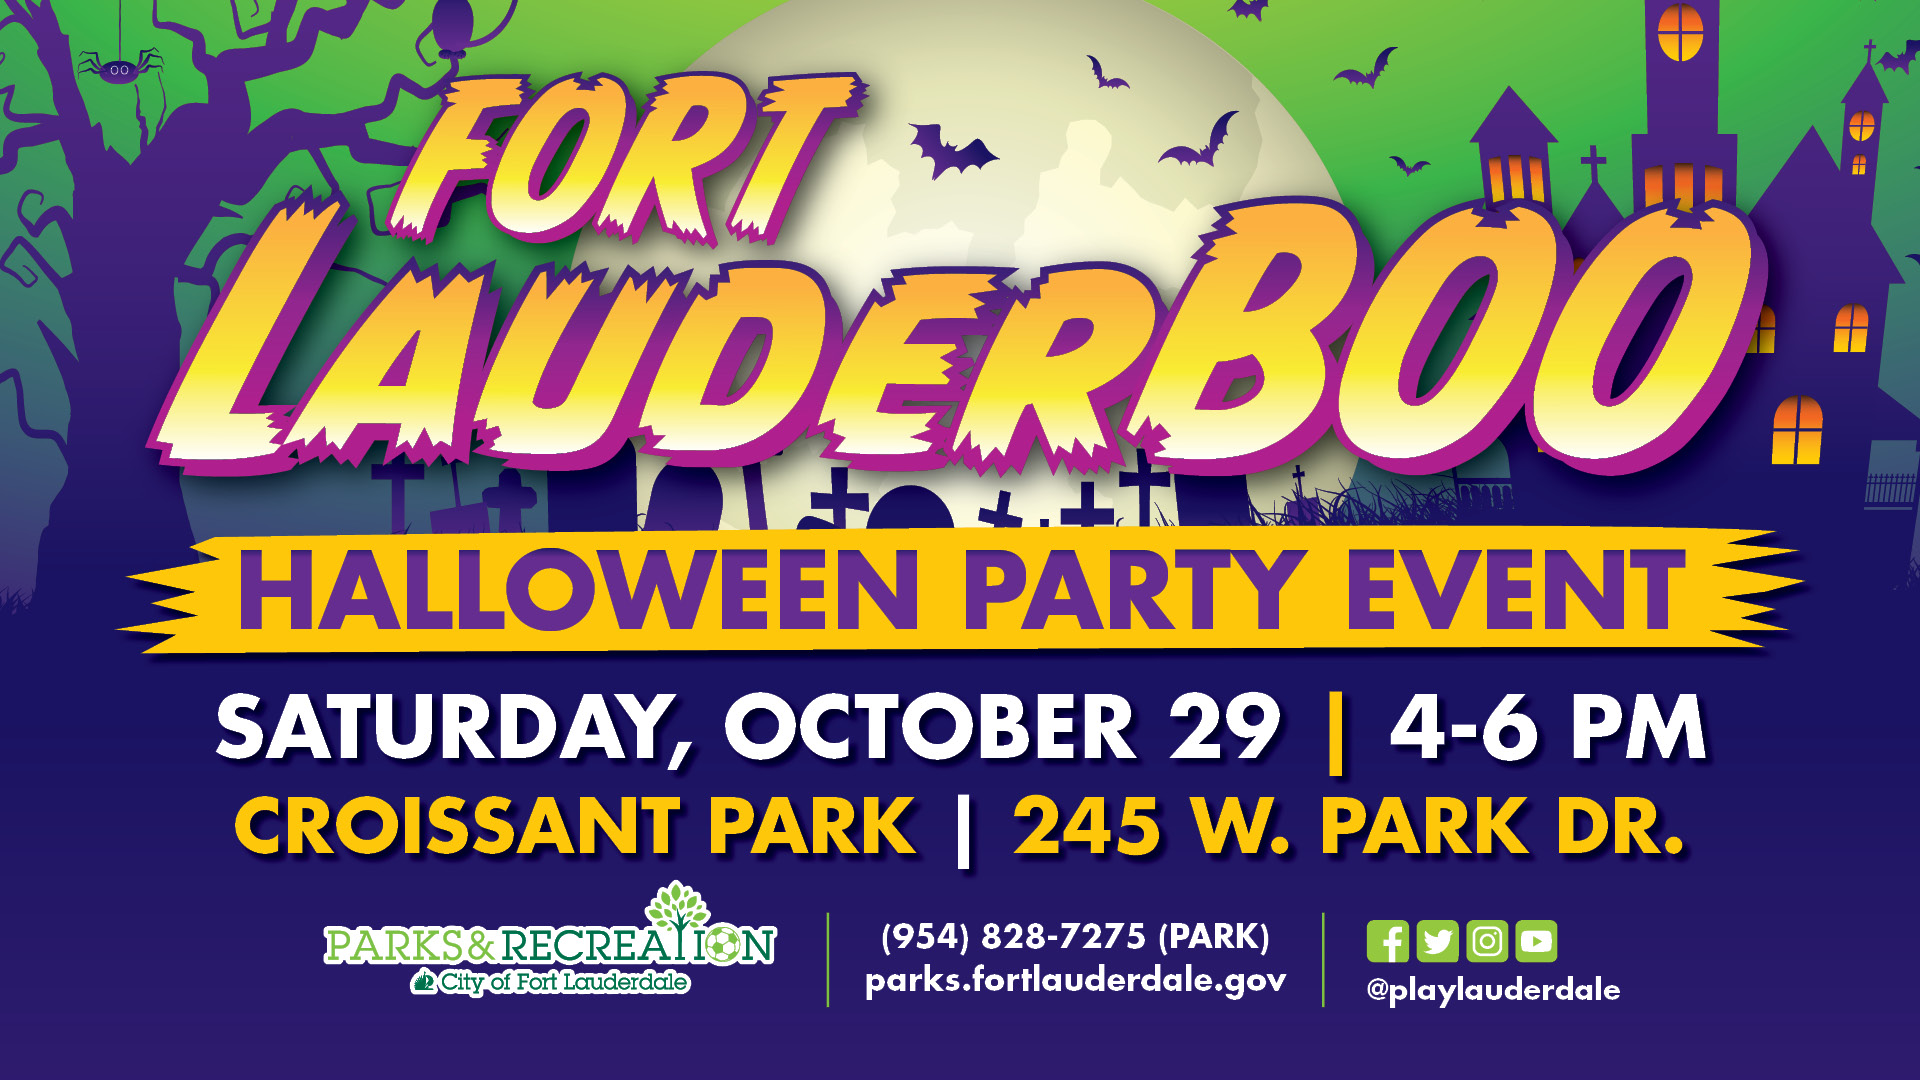 Fort LauderBOO Halloween Party Event at Croissant Park